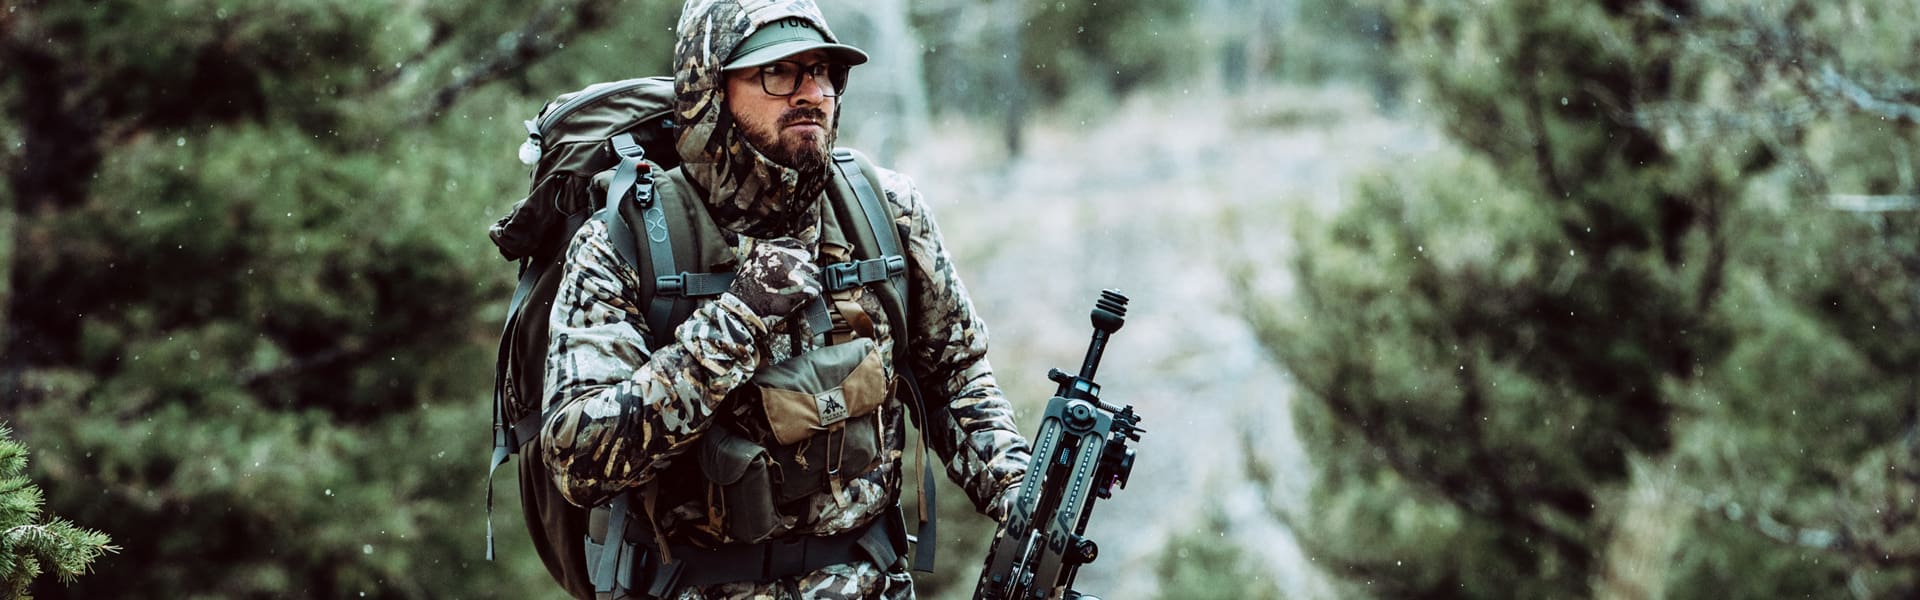 TUO Gear - Technical Hunting Clothing